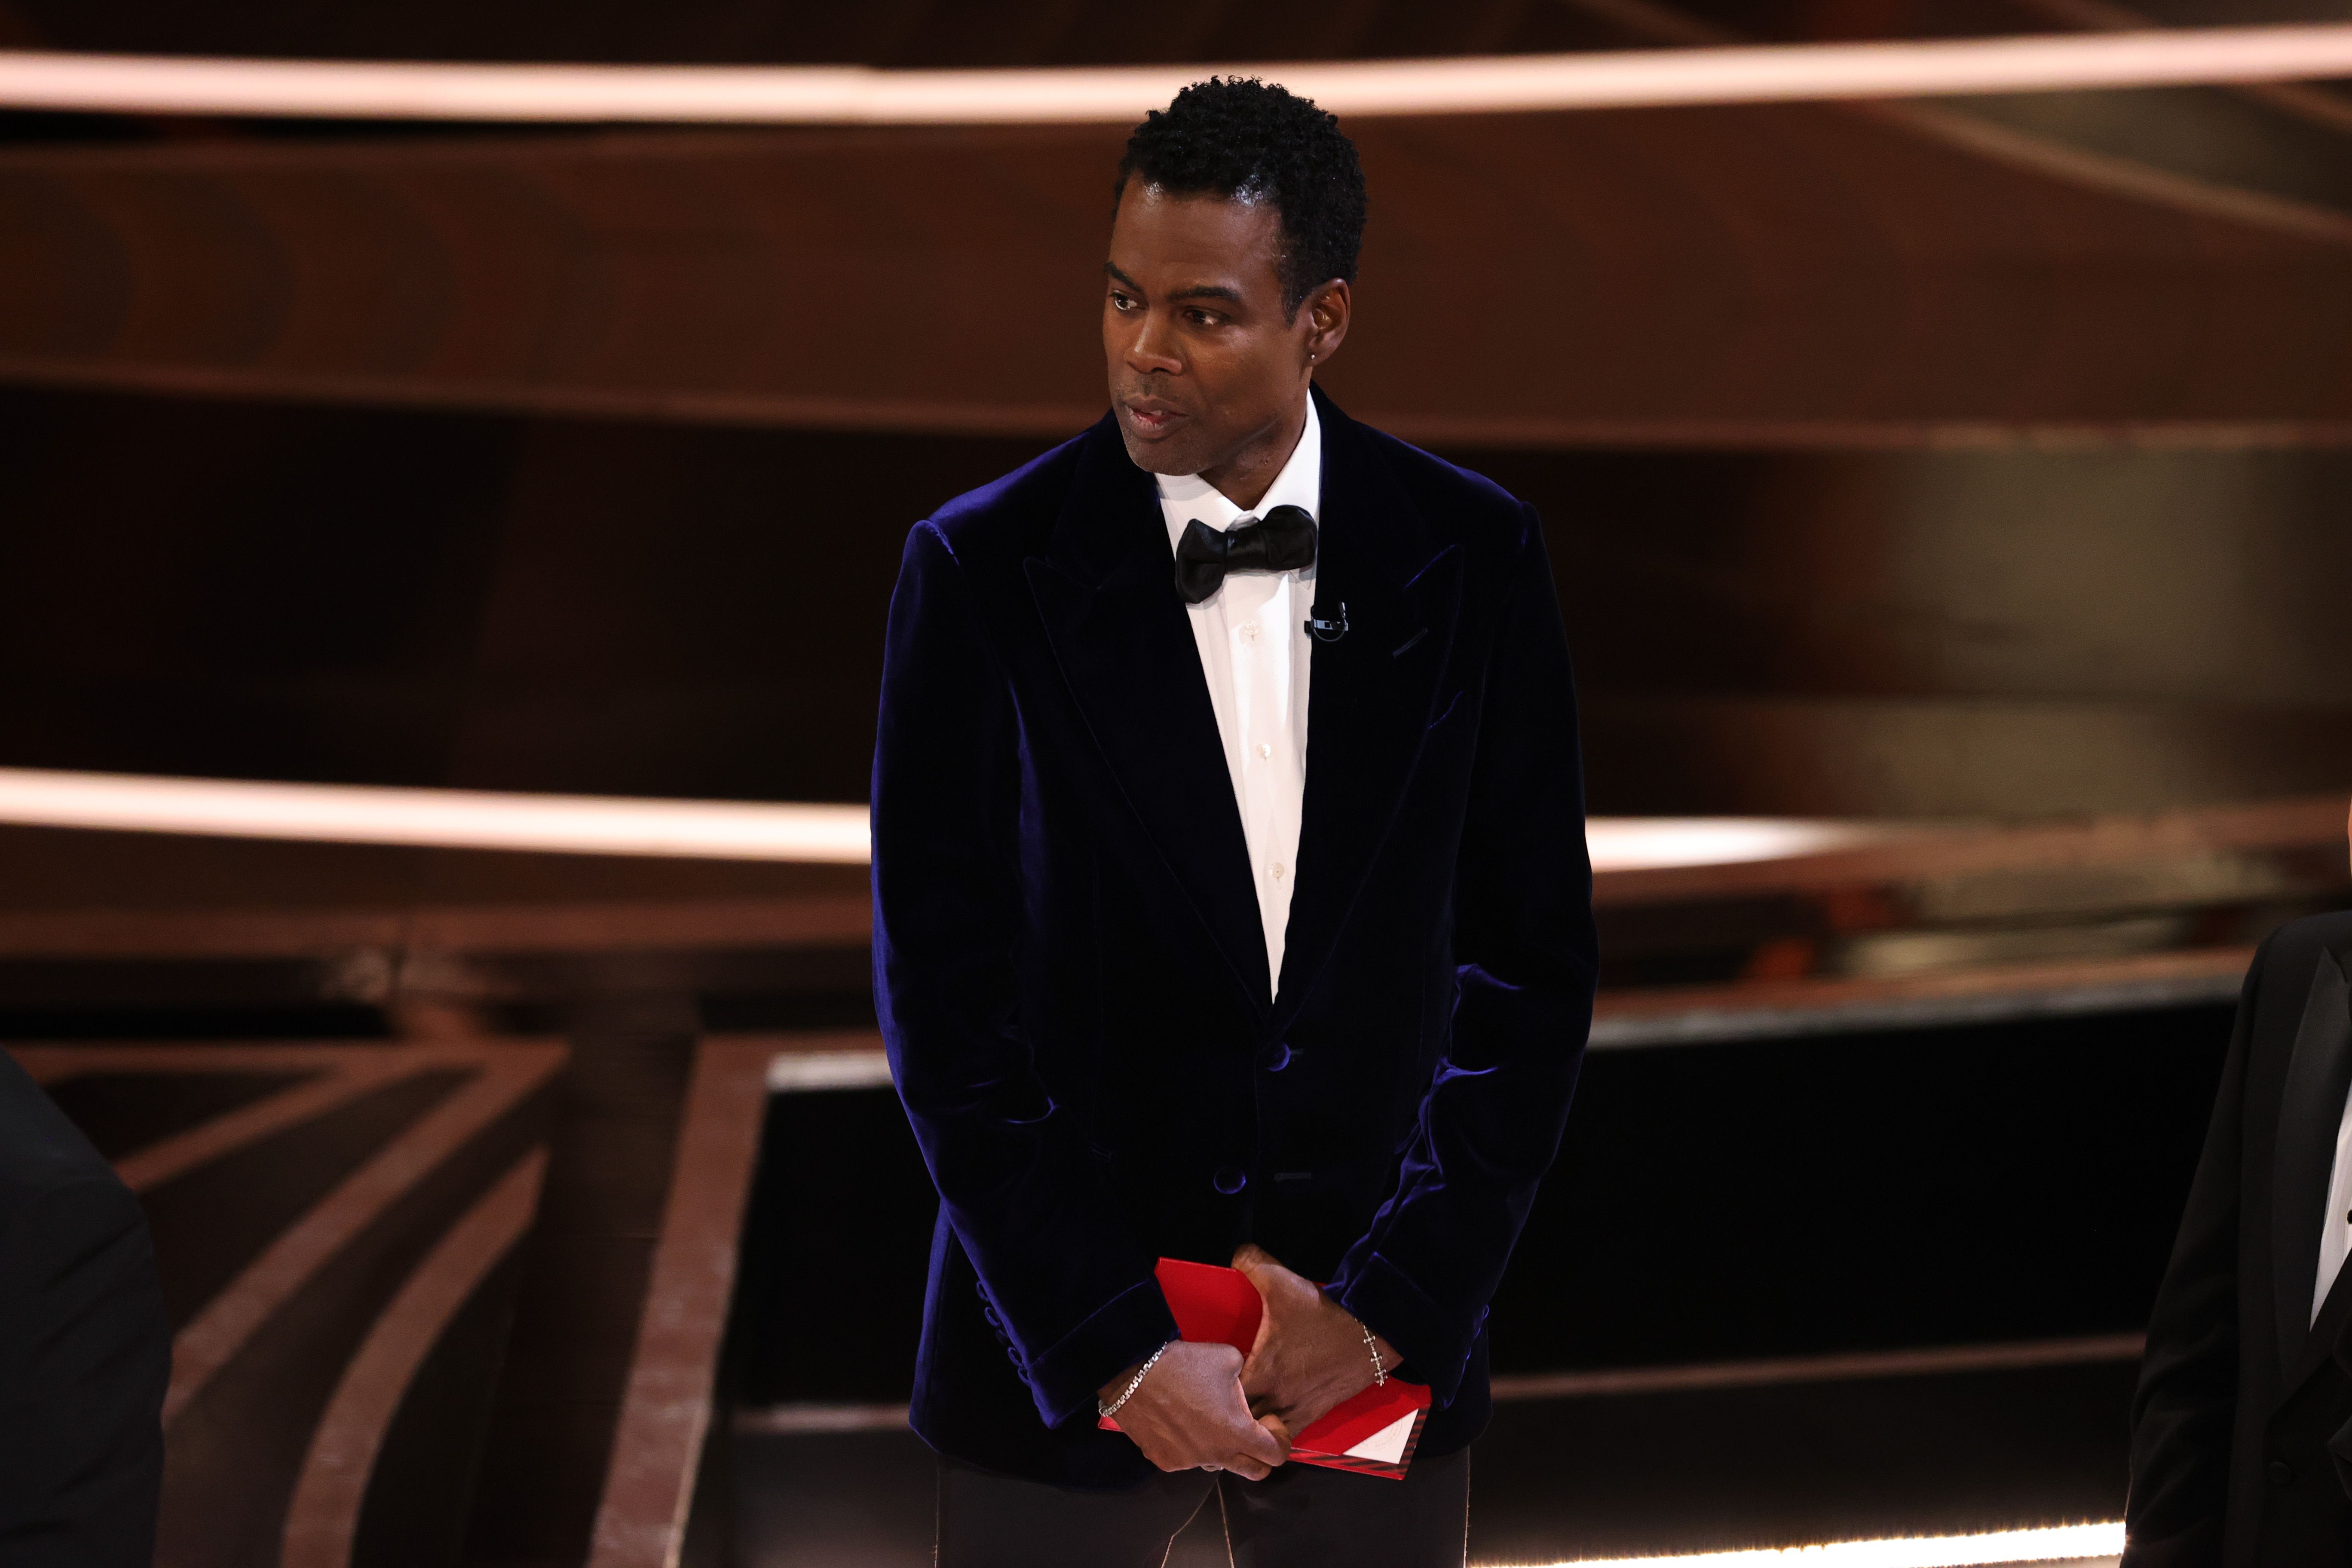 Chris Rock could host the 2023 Oscars, ABC chairman is open for his return